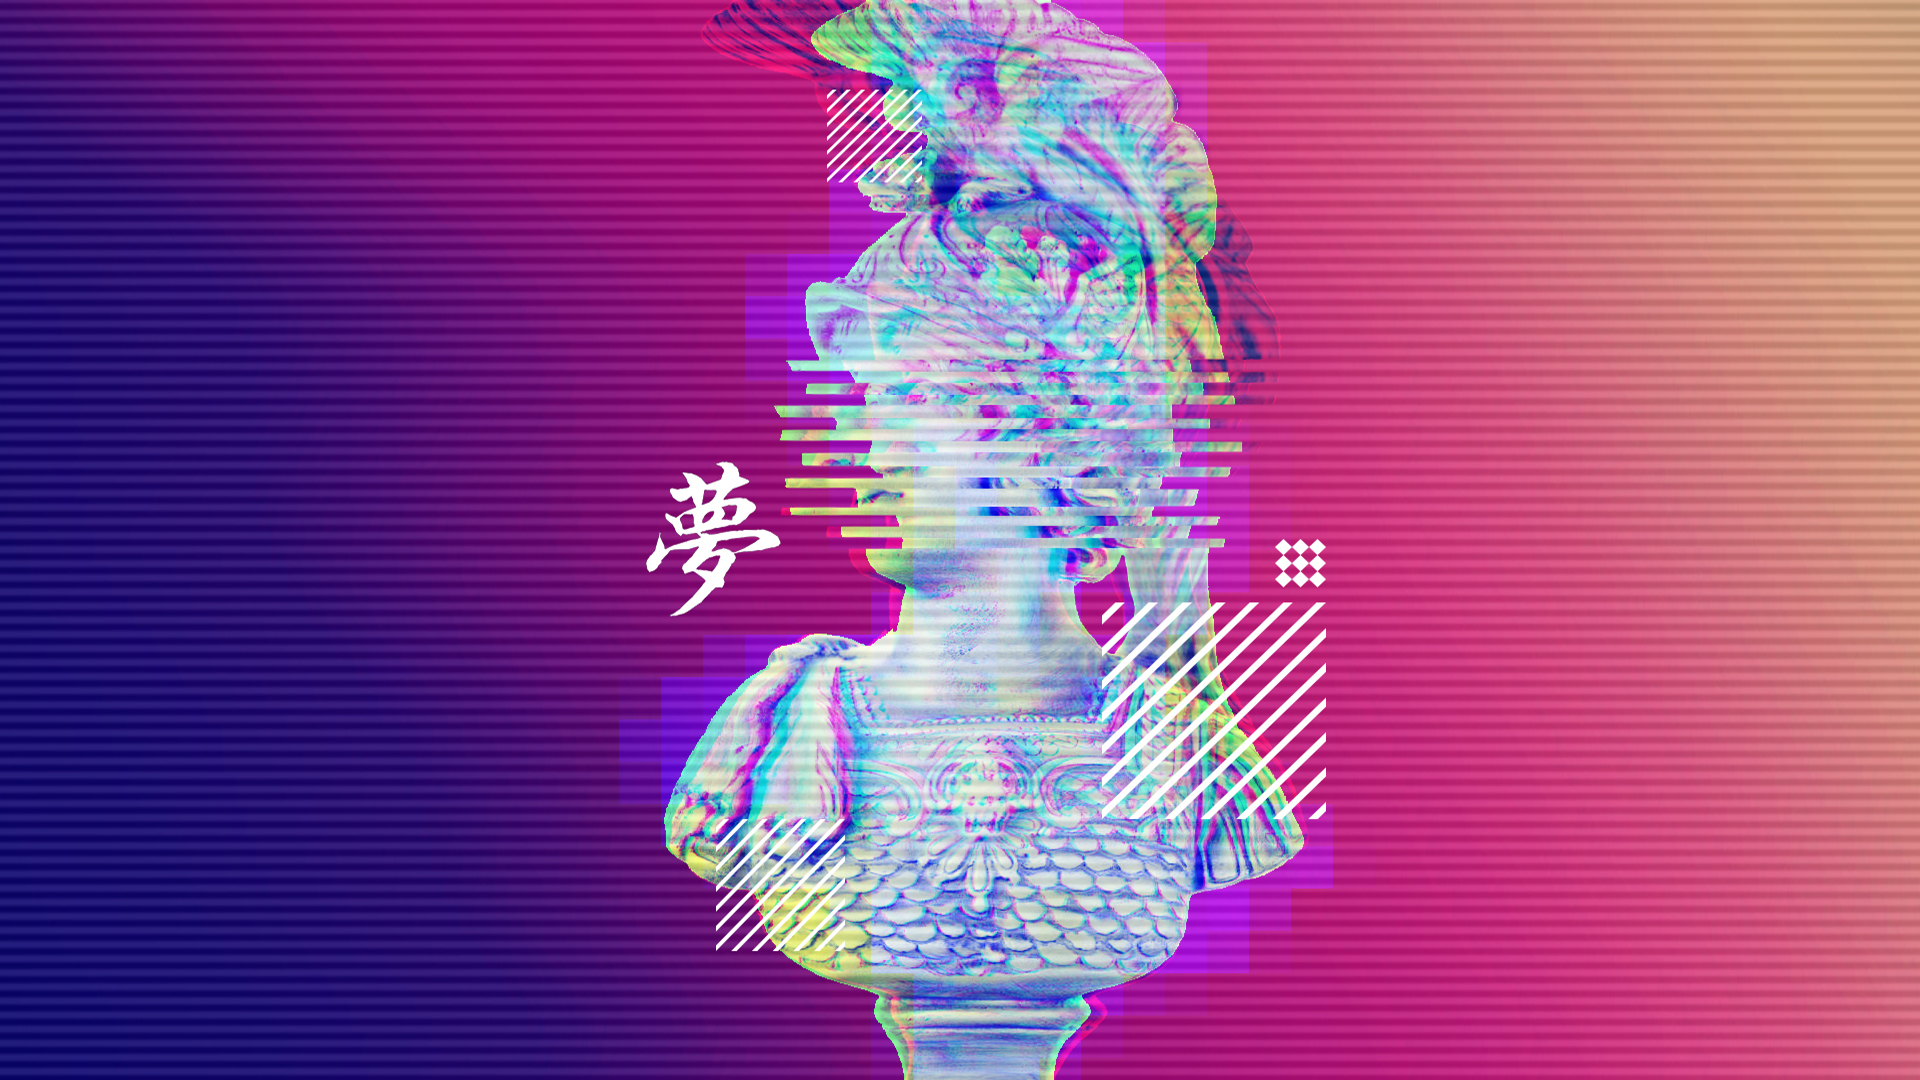 A poster for the film 'the woman in black' - Vaporwave